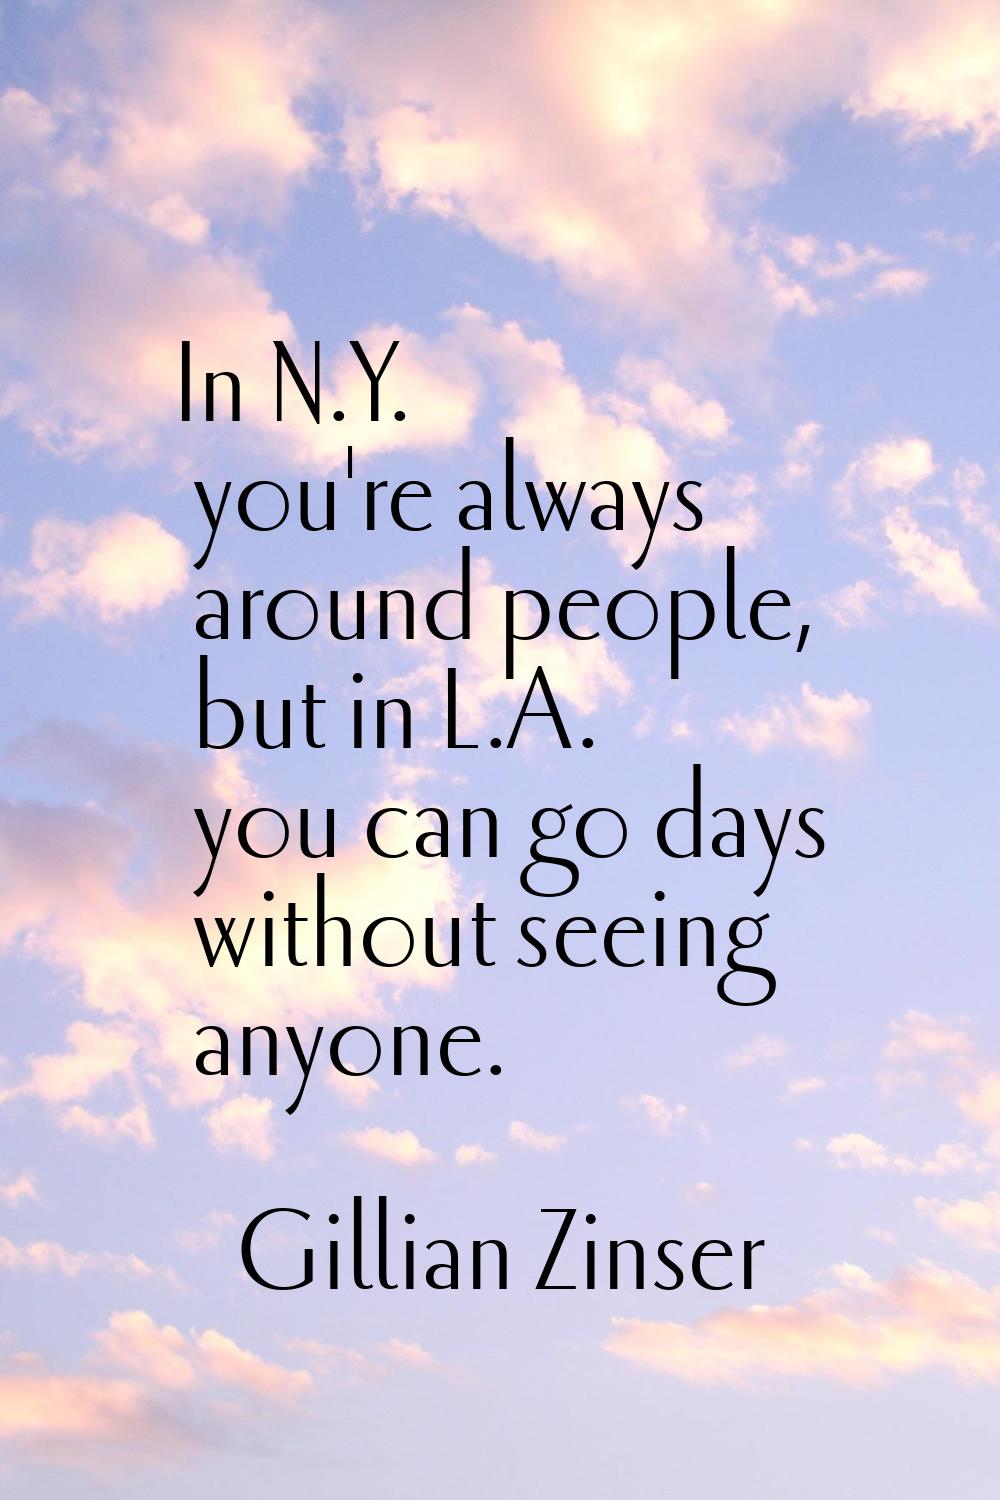 In N.Y. you're always around people, but in L.A. you can go days without seeing anyone.